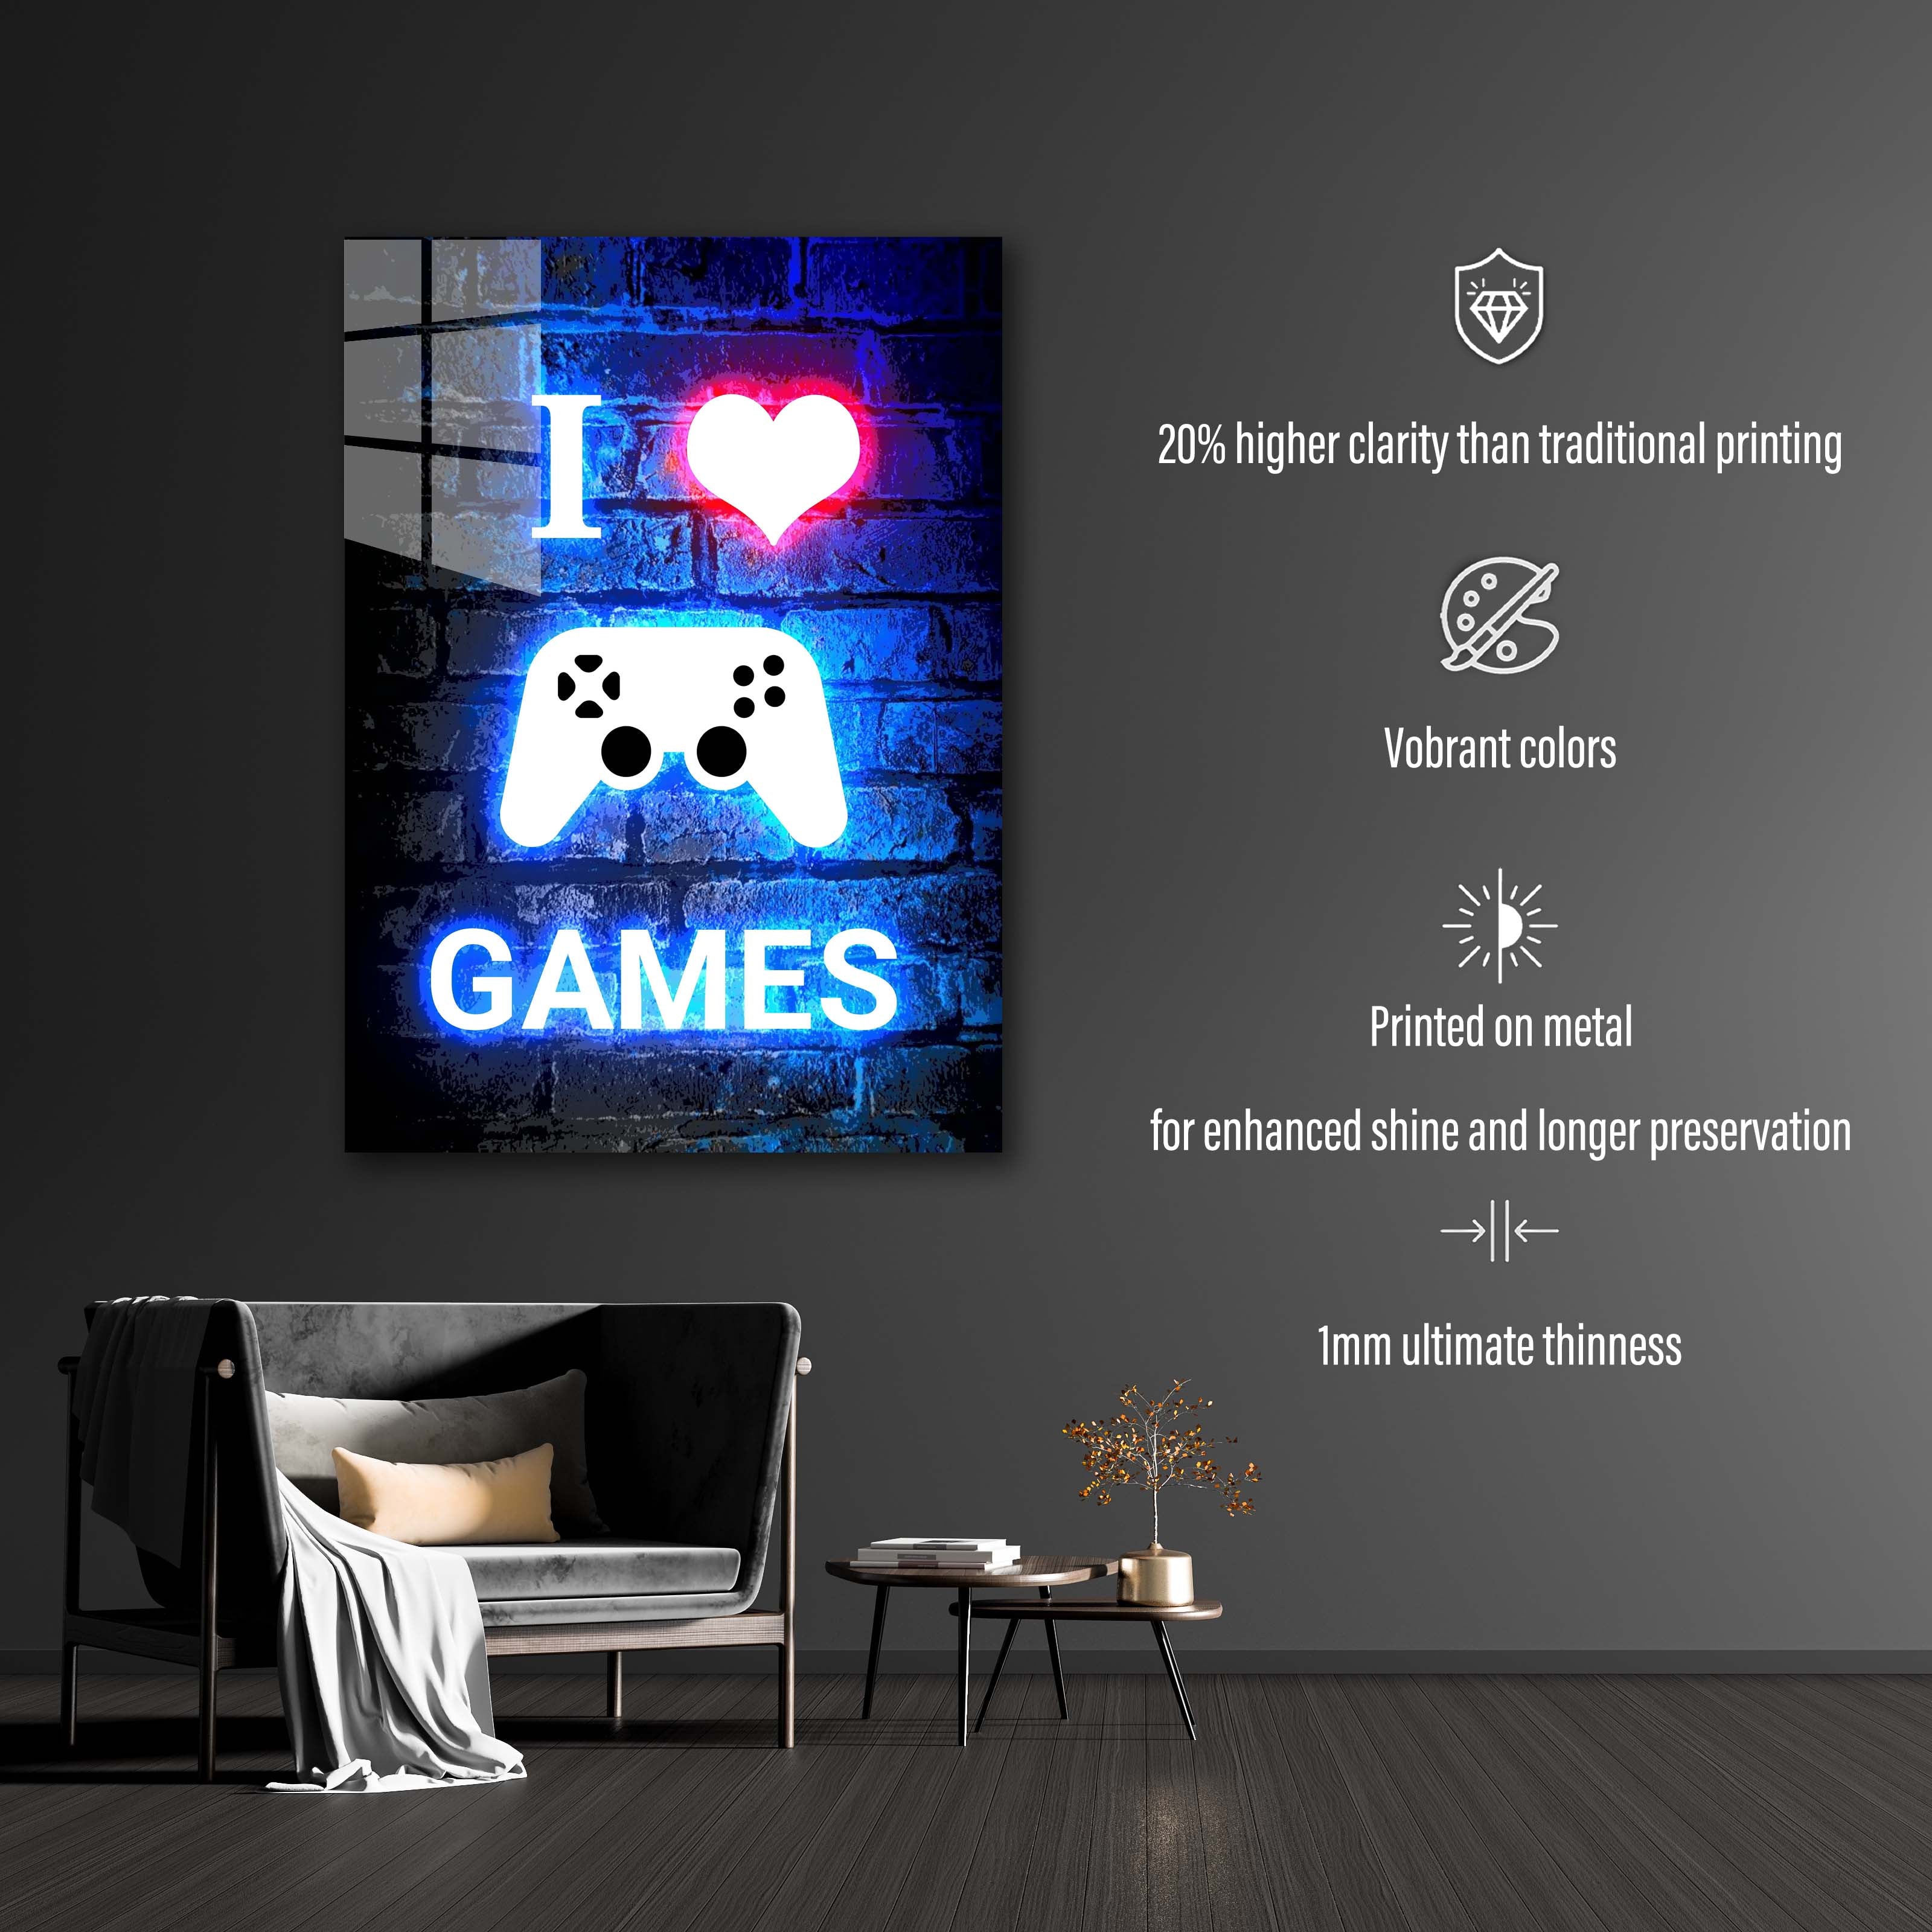 Games -designed by @Dayo Art